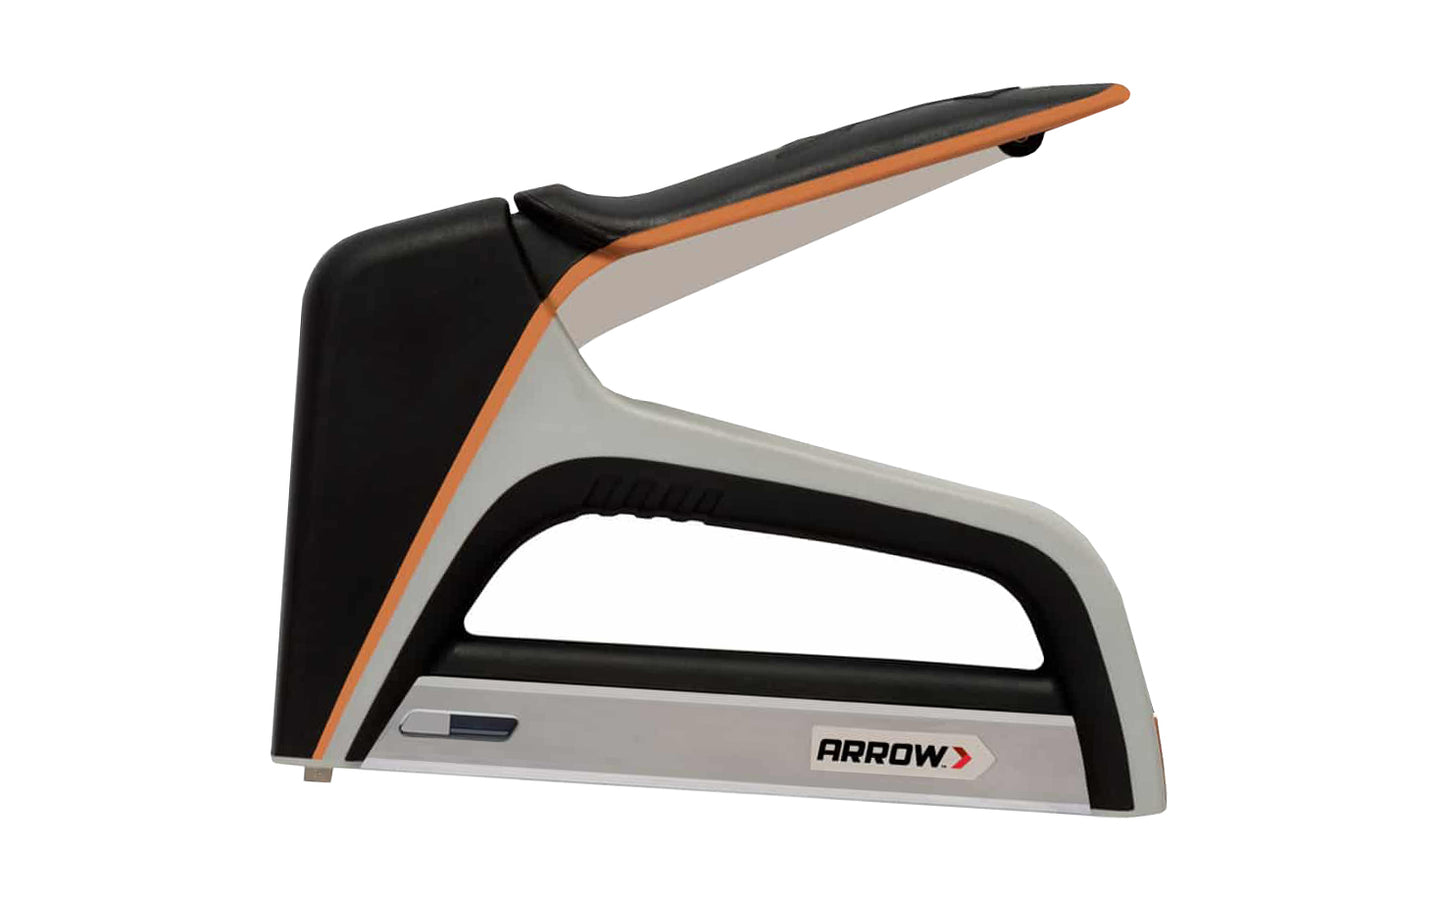 Arrow T25X "WireMate" Wire Stapler is a handy, ergonomic cable tacker that doesn’t sacrifice power so you can conquer all of your wiring projects. Ergonomic soft rubber grip. Good for Low Voltage Wiring. Ideal for organizing wires. Works with Arrow T25 Staples. 079055500131